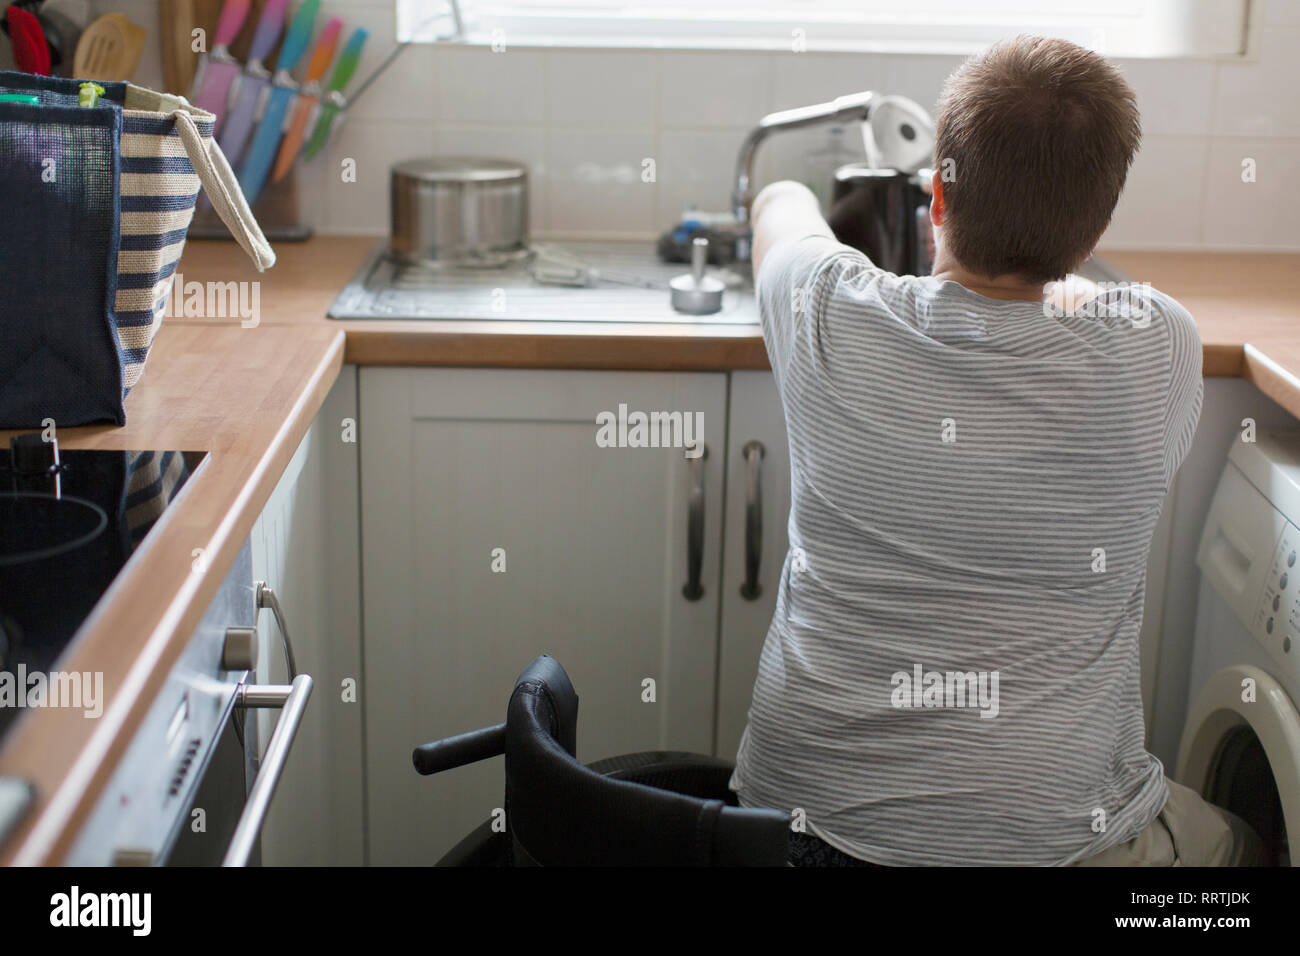 Young woman in wheelchair filling kettle for tea at apartment kitchen sink Stock Photo